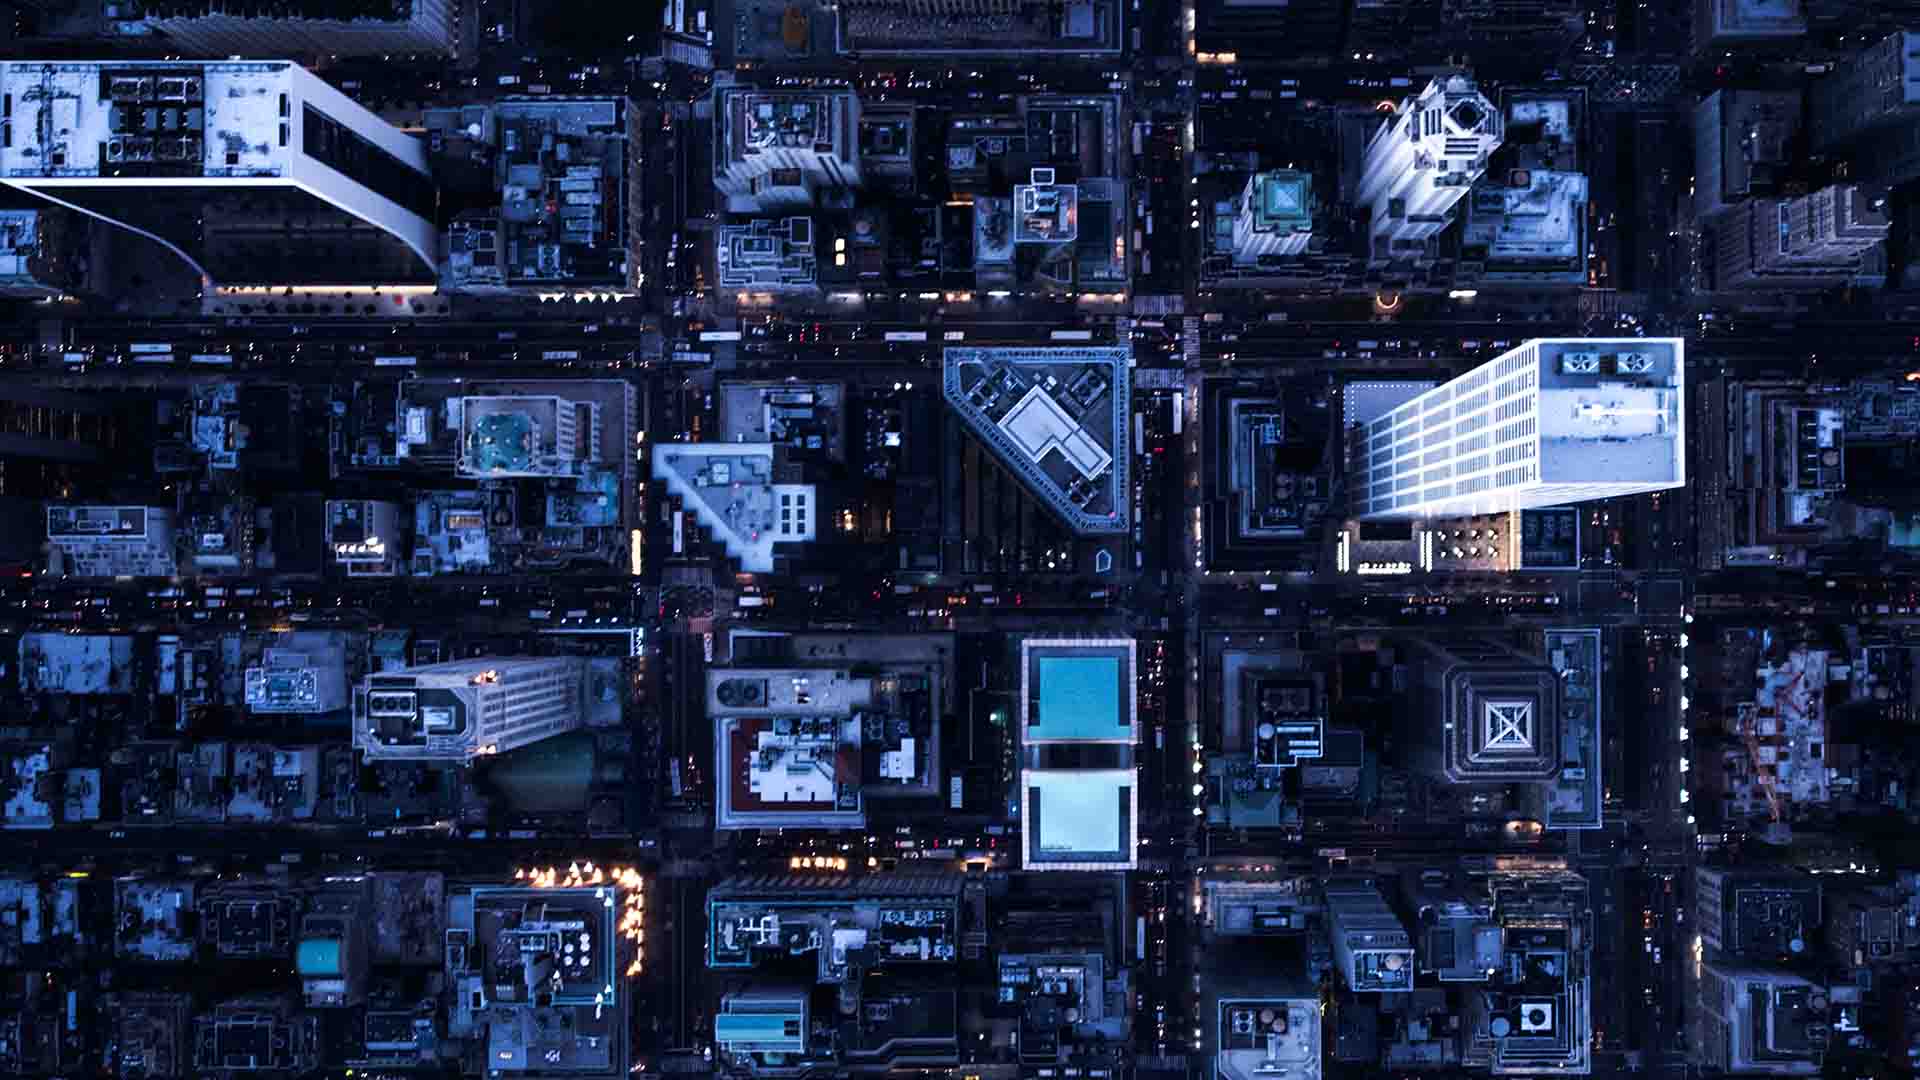 Aerial photograph of city, representing complexity of maintaining identity security